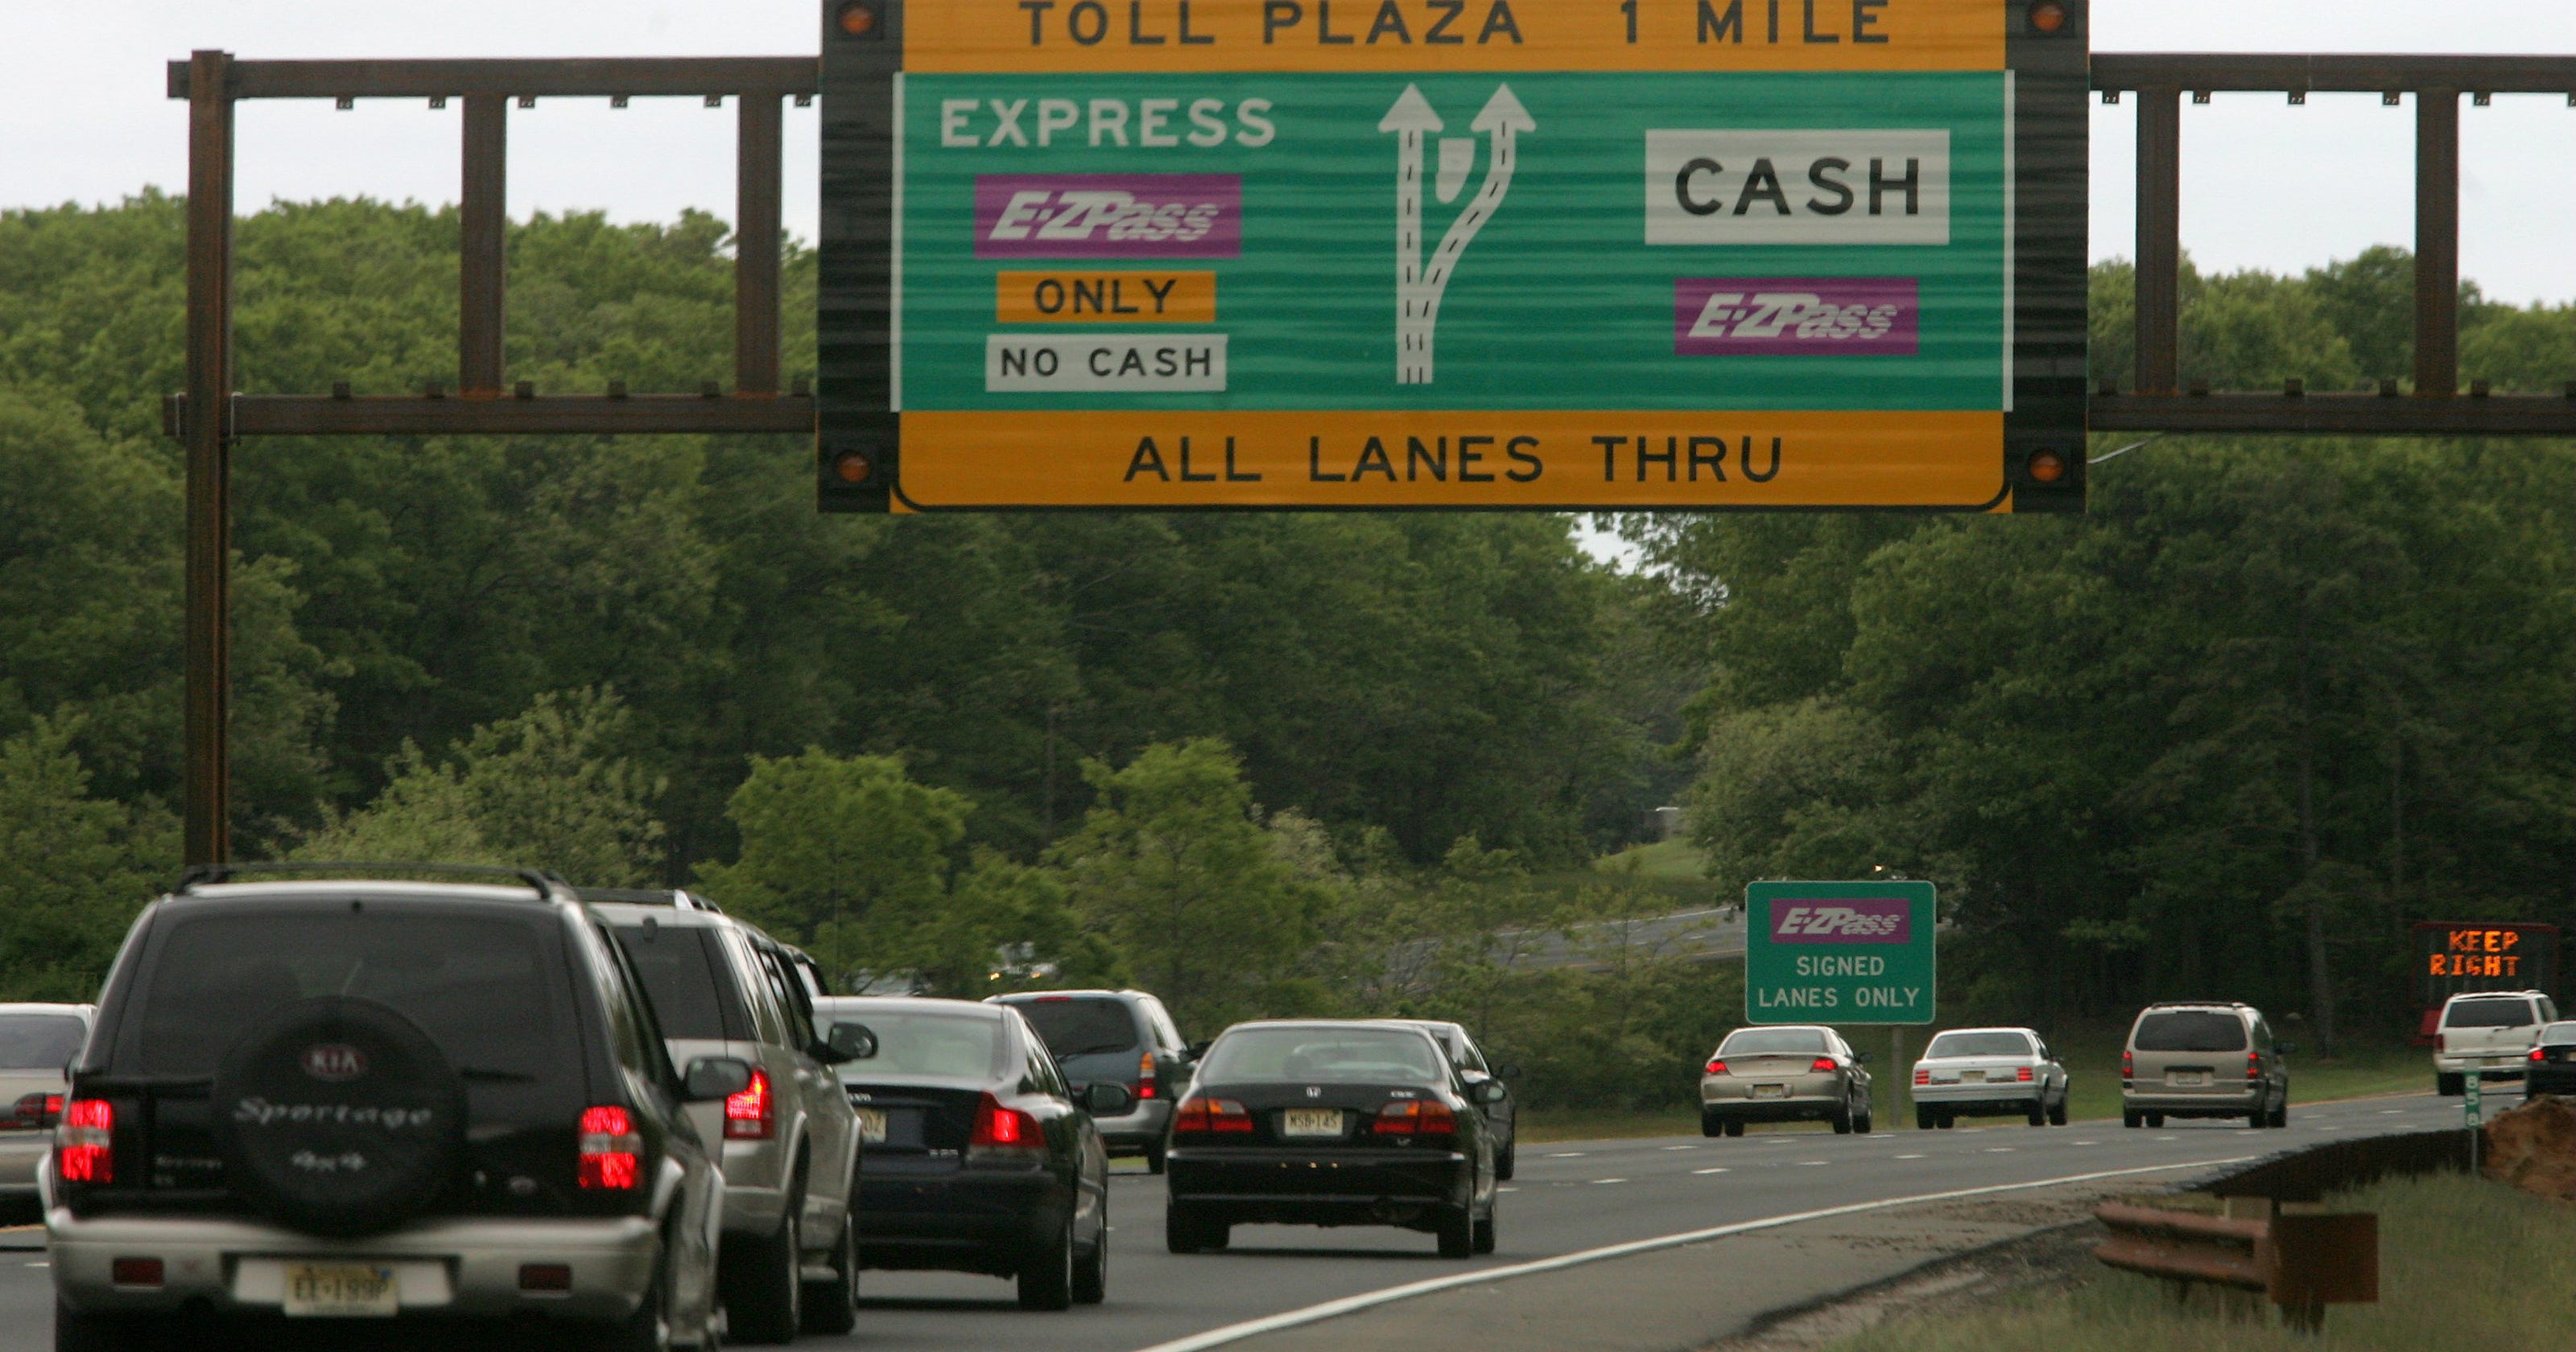 E-ZPass will become more vital in New York: Here are helpful tips to know